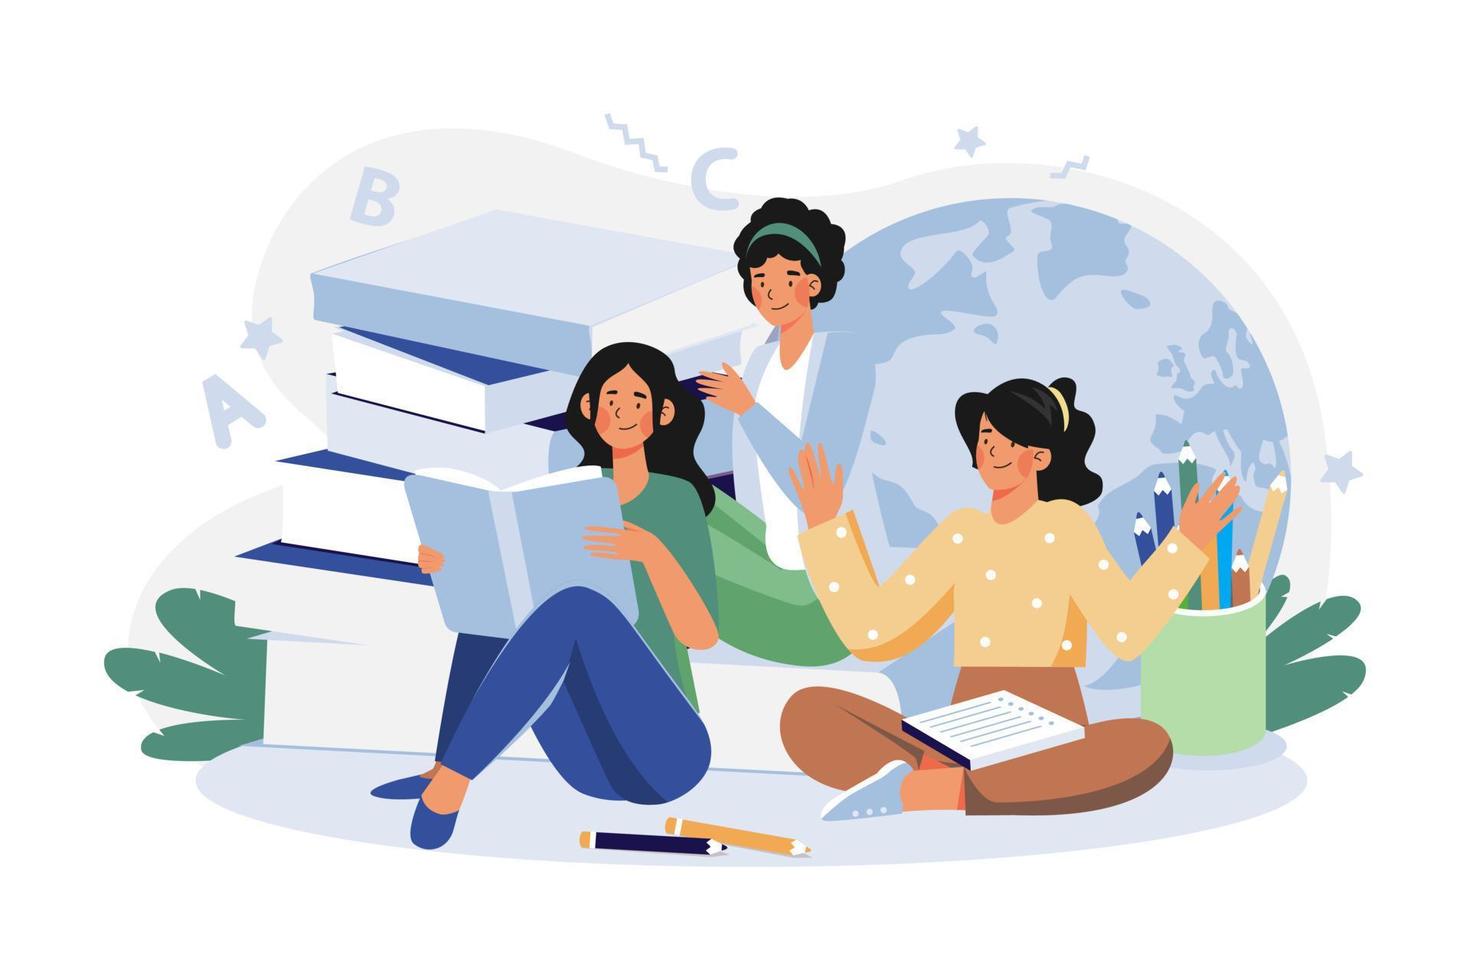 Students Reading Book Together Illustration concept on white background vector